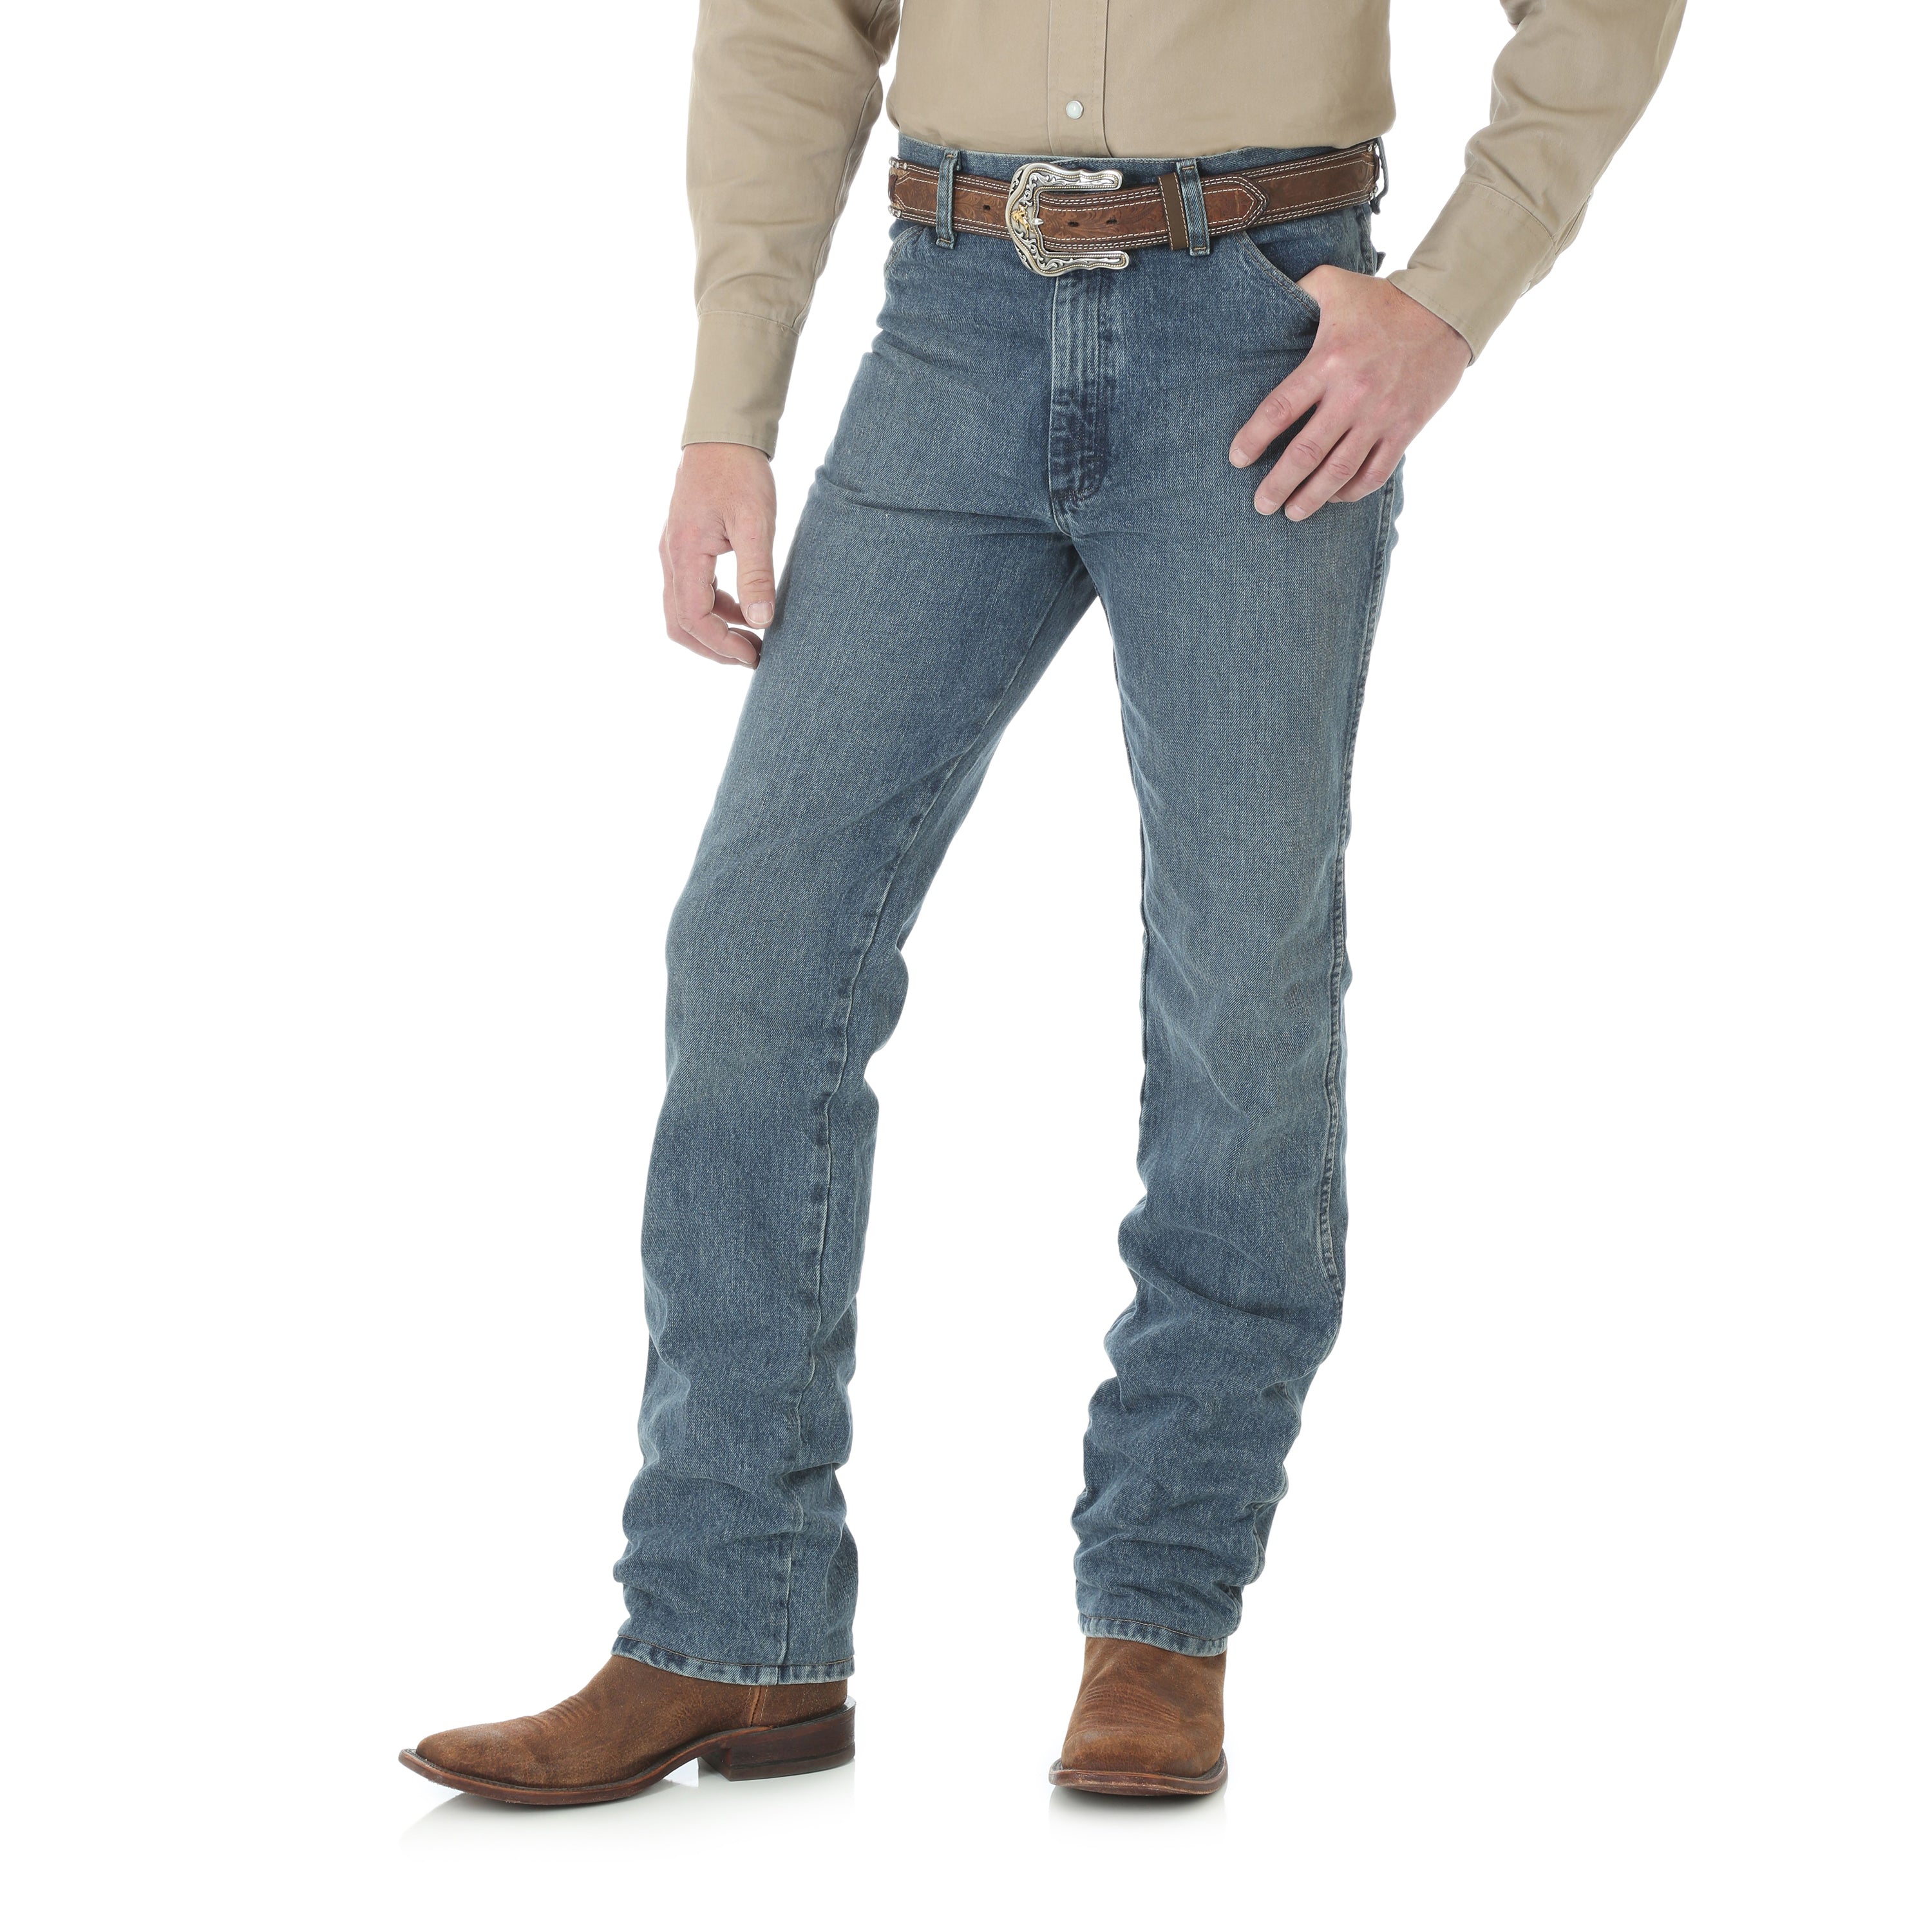 Jeans Vaquero Wrangler Hombre Slim Fit – H936 Brown – Ranch & Corral NOT  EVERYONE USES THE BEST